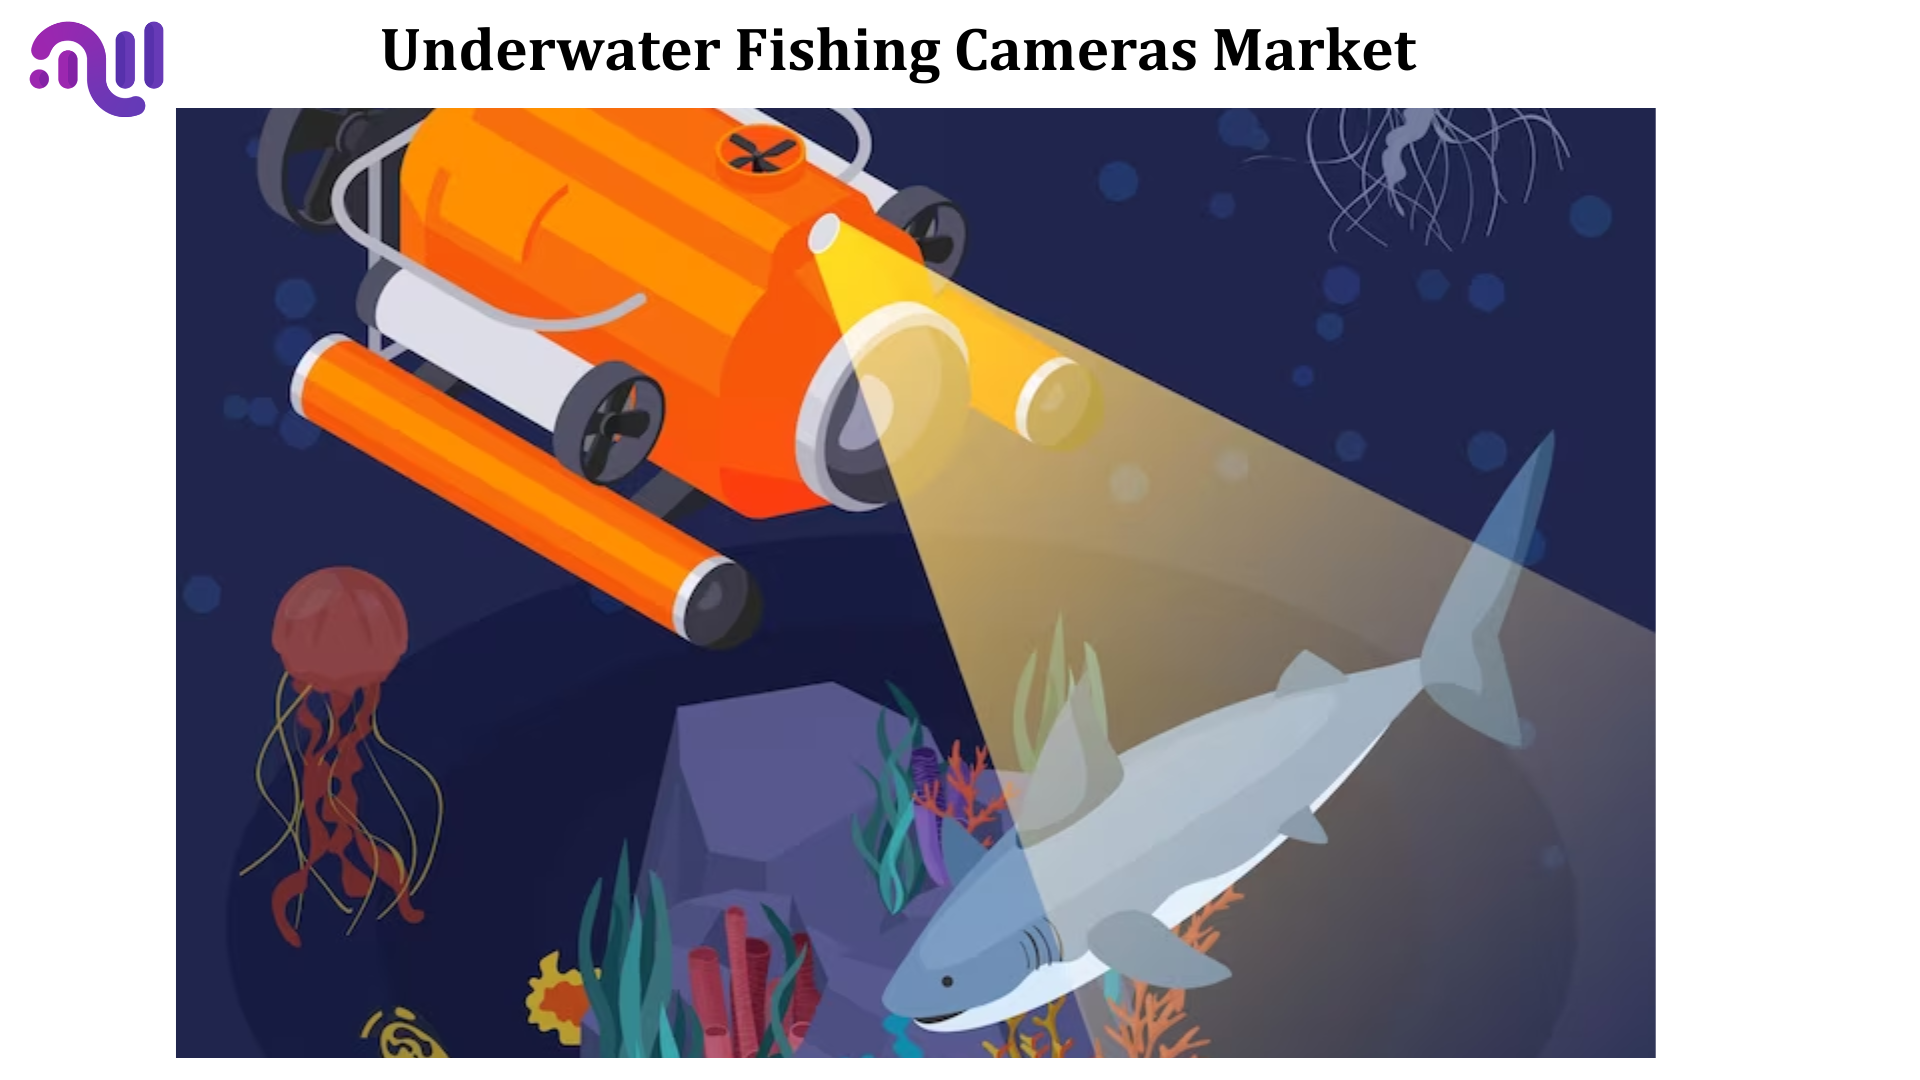 Underwater Fishing Cameras Market To Develop Speedily With CAGR Of 13.9% By 2032